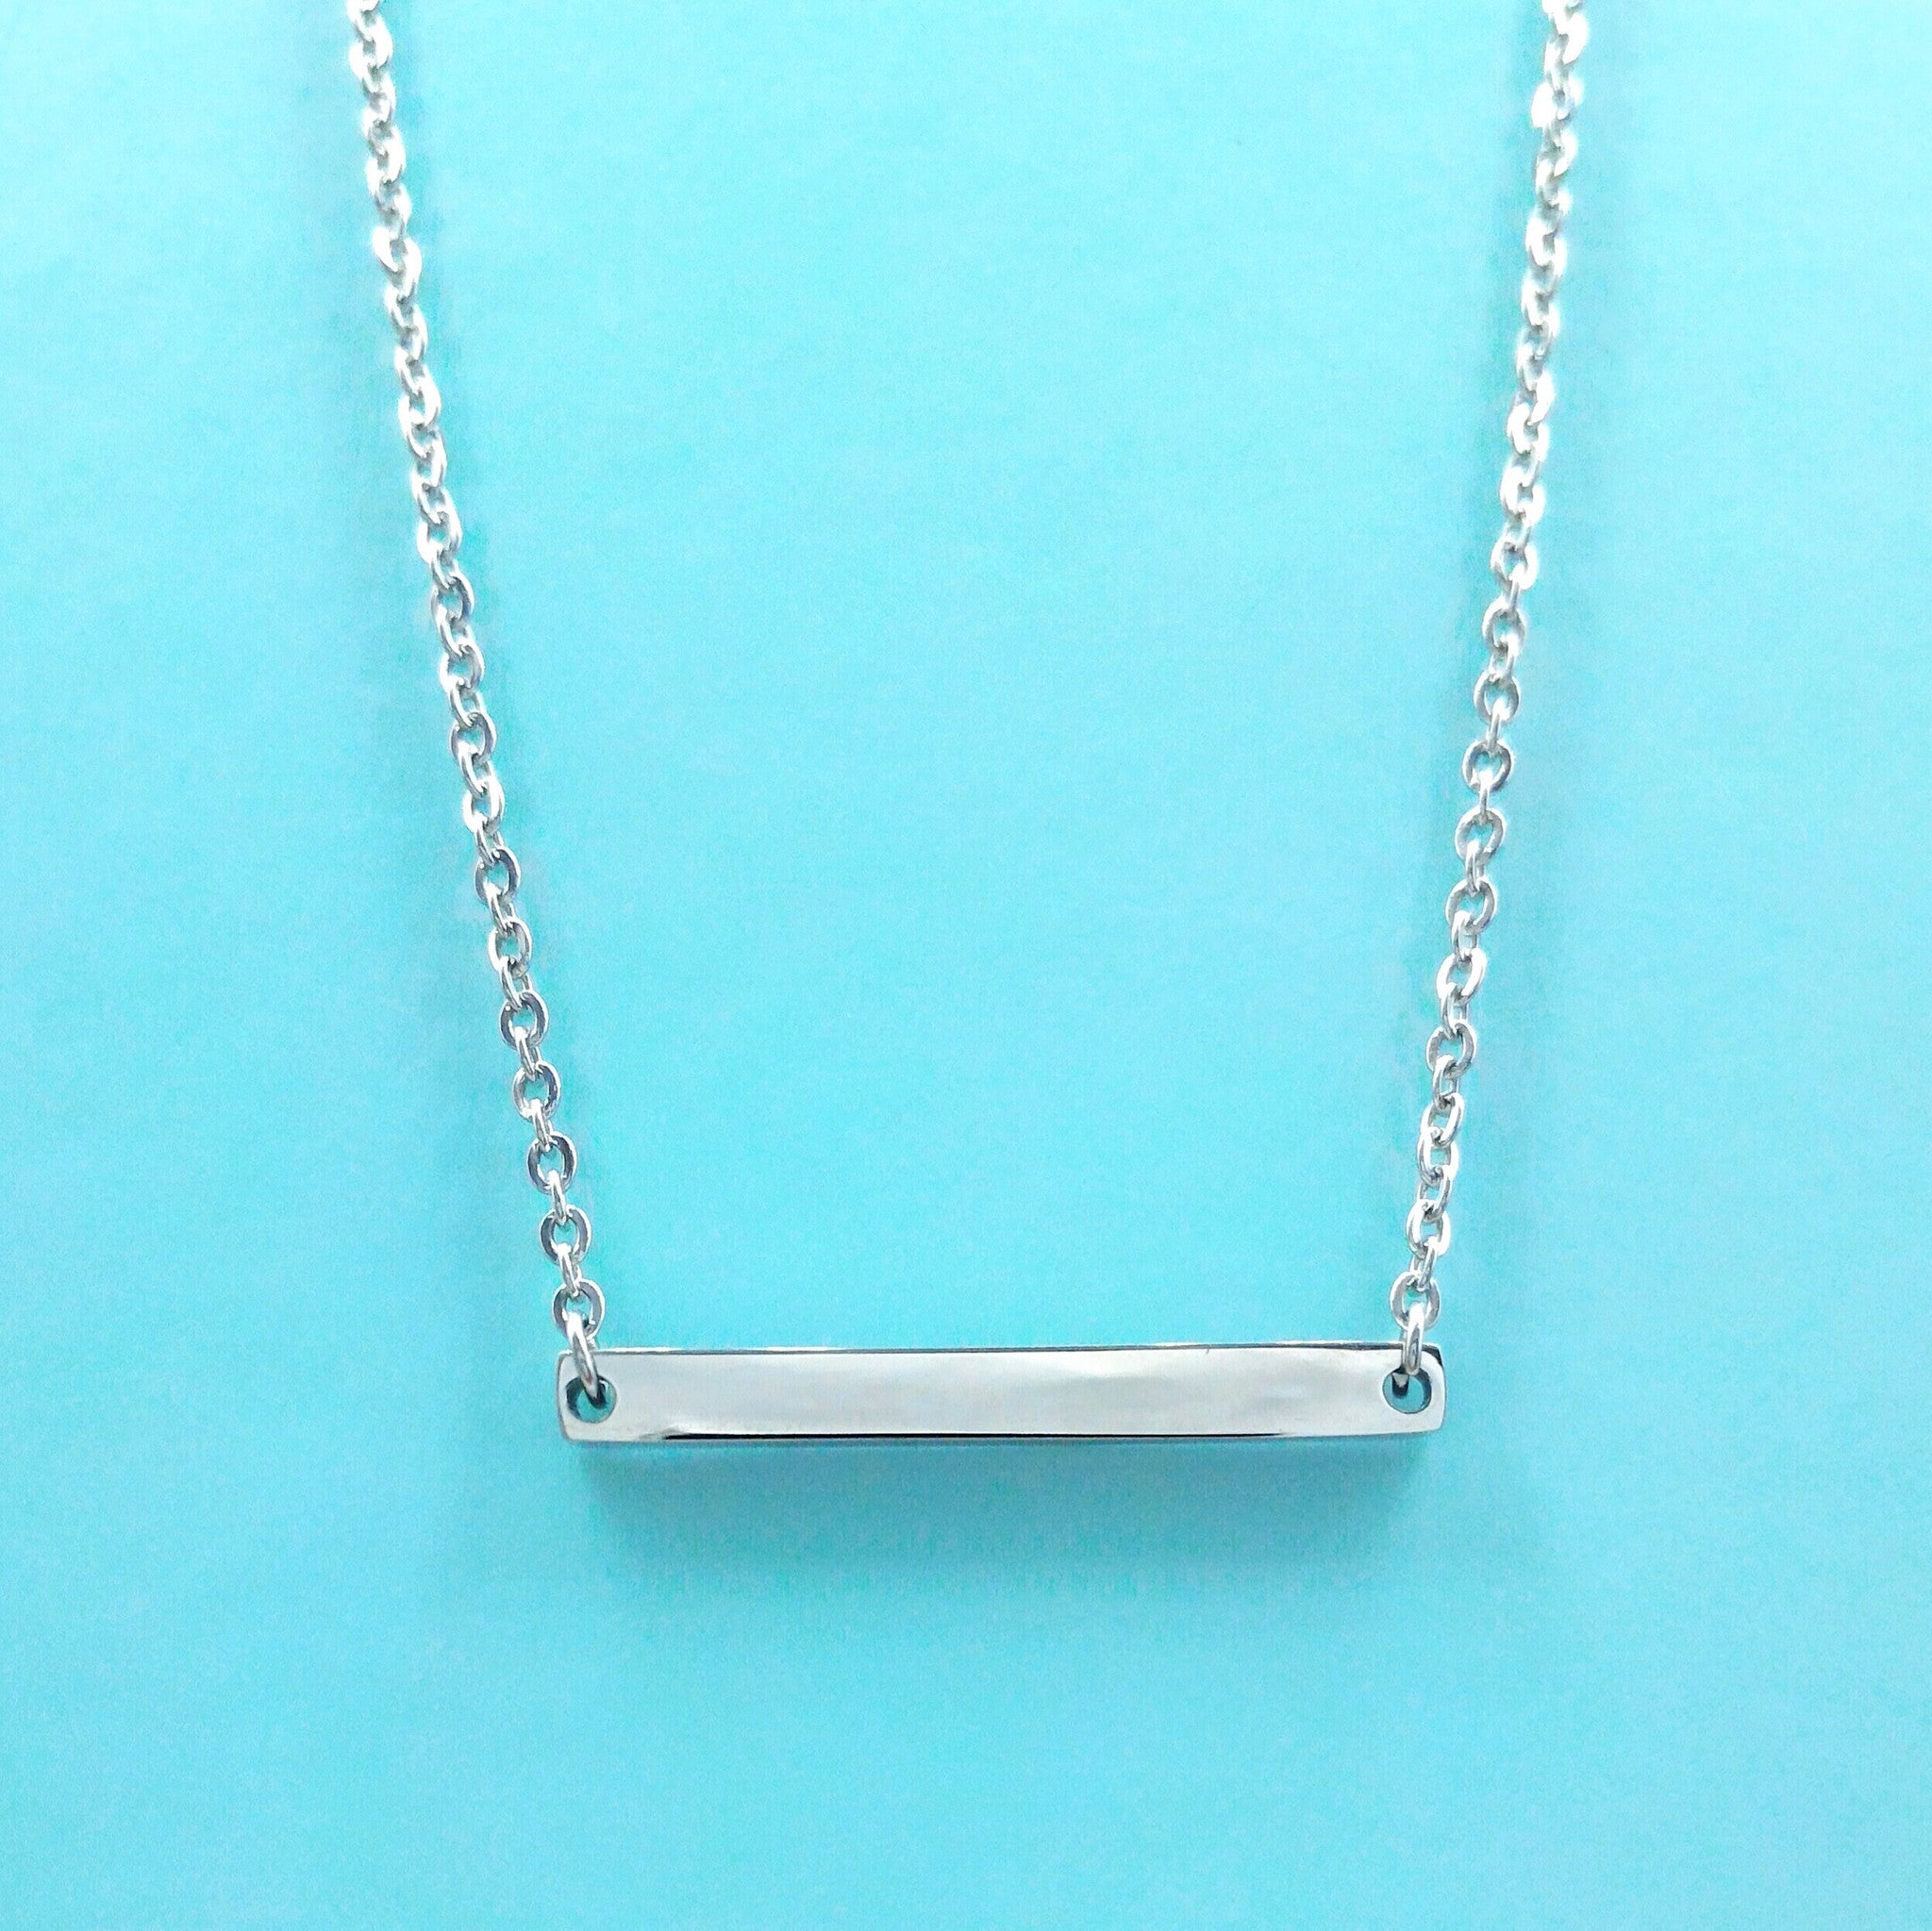 Stainless Steel Bar Necklace